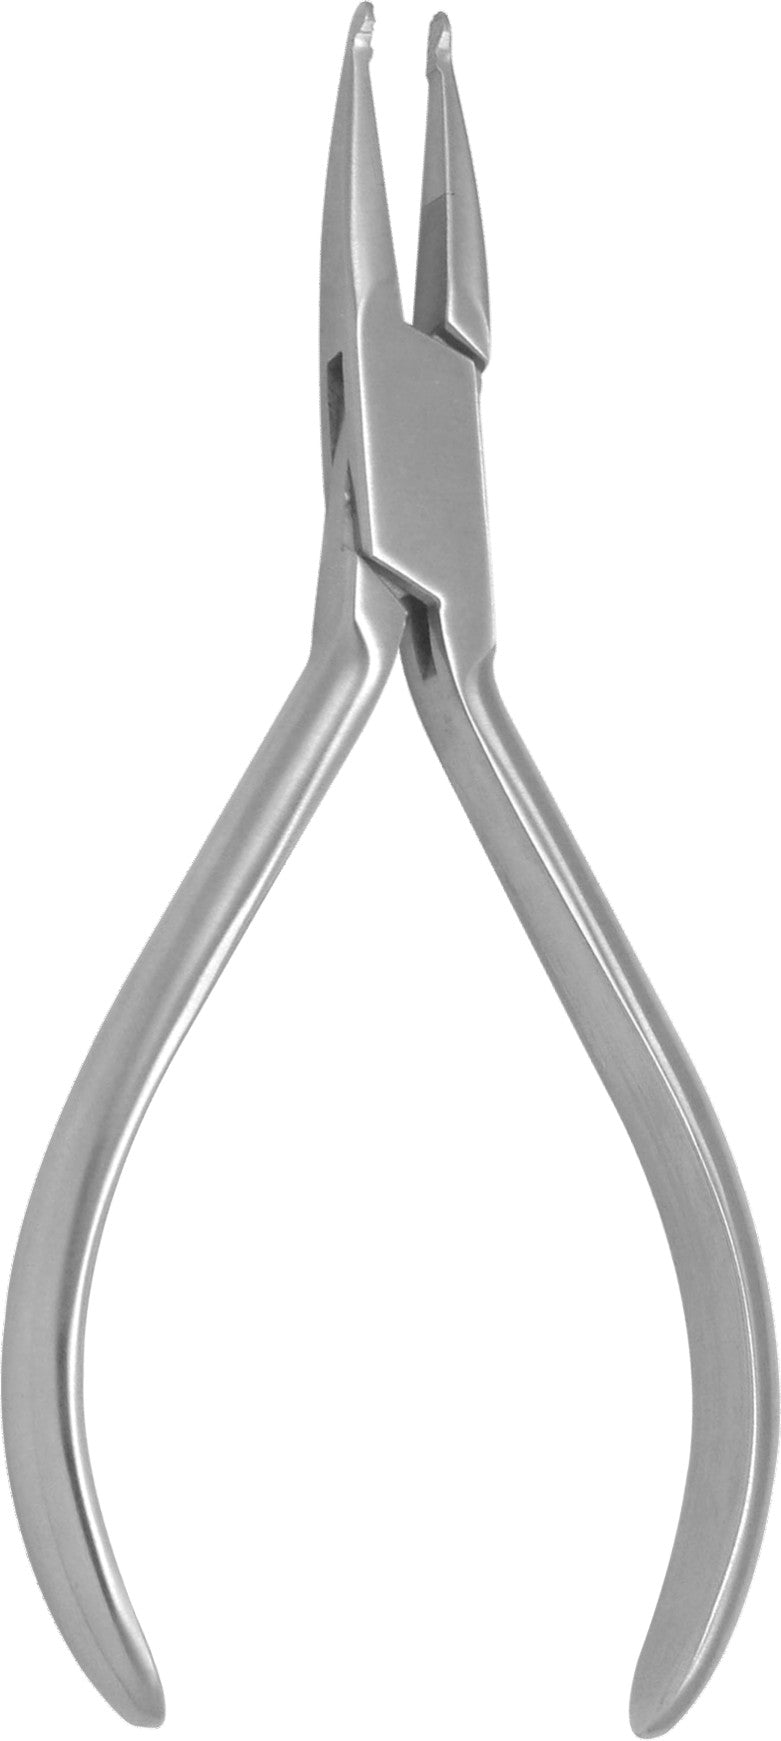 How Pliers with Small Tip